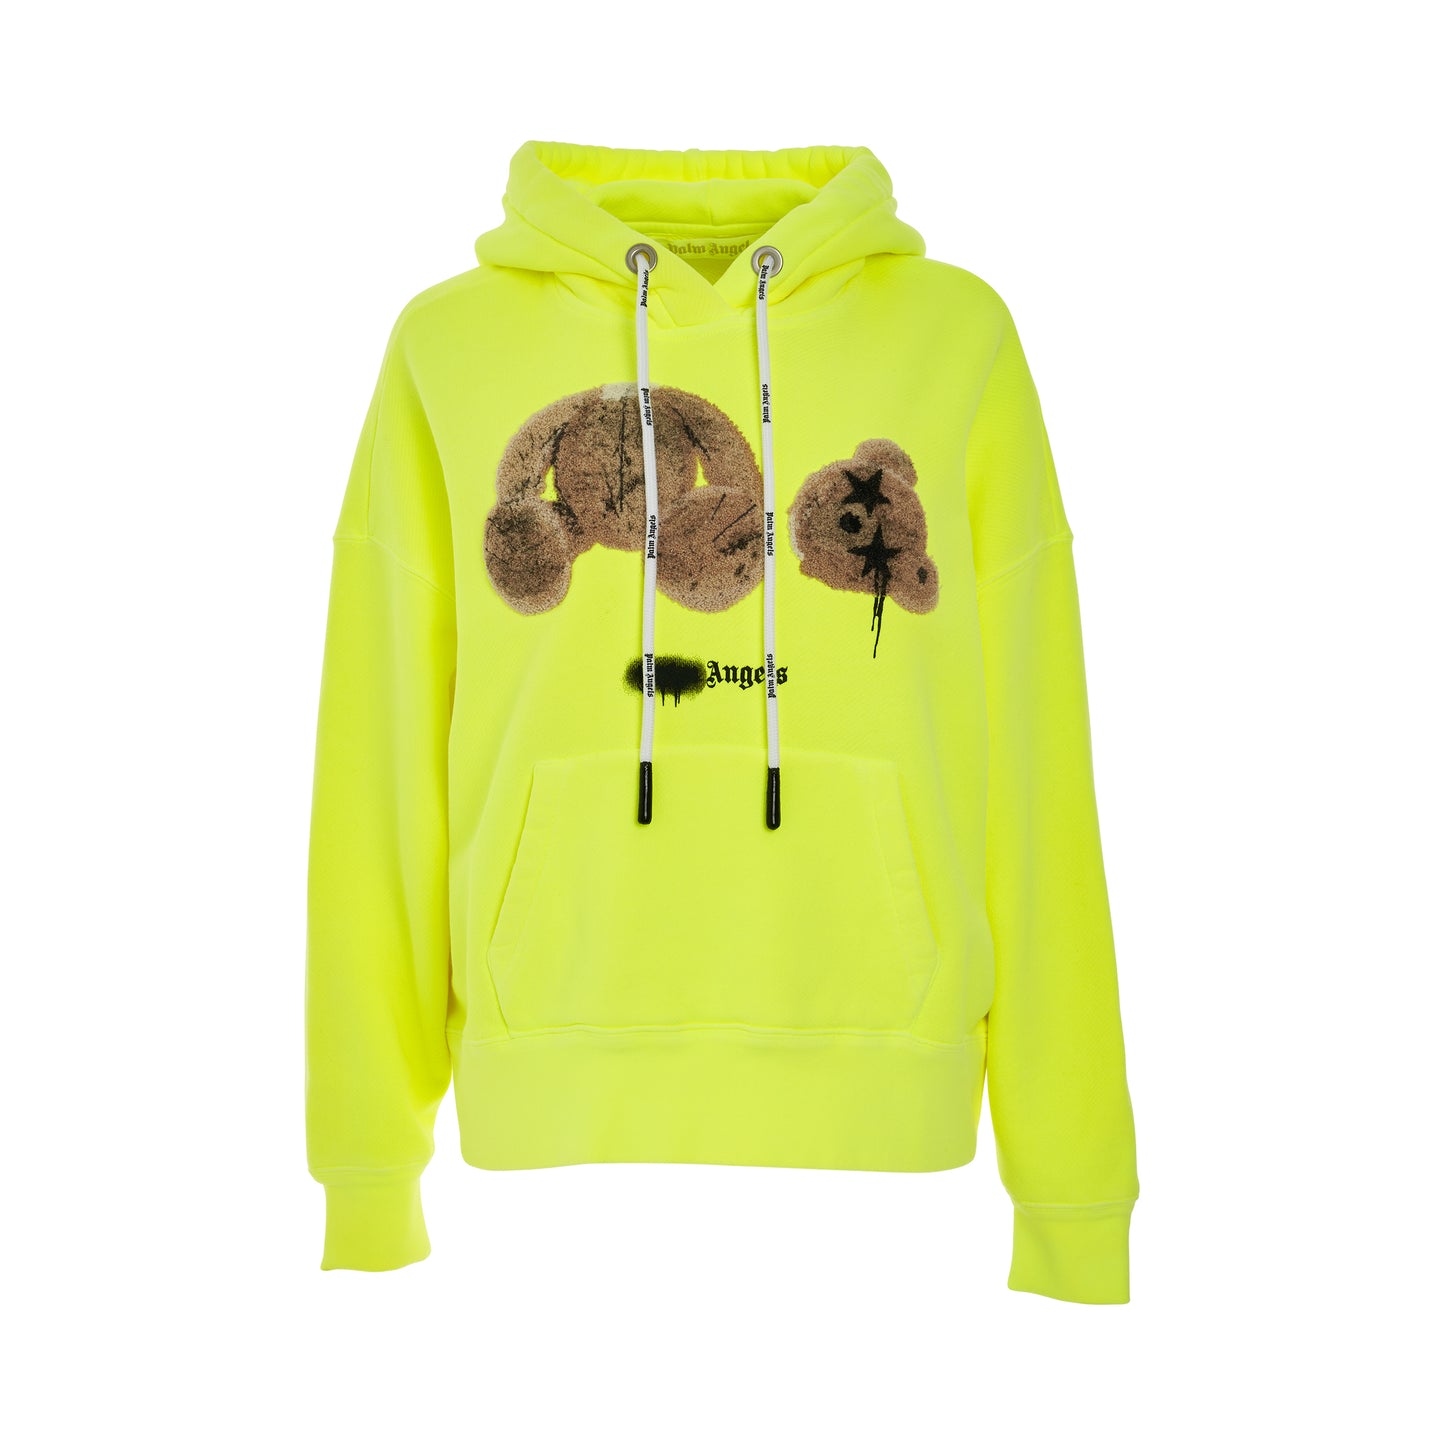 Sprayed PA Bear Hoodie in Yellow Fluo